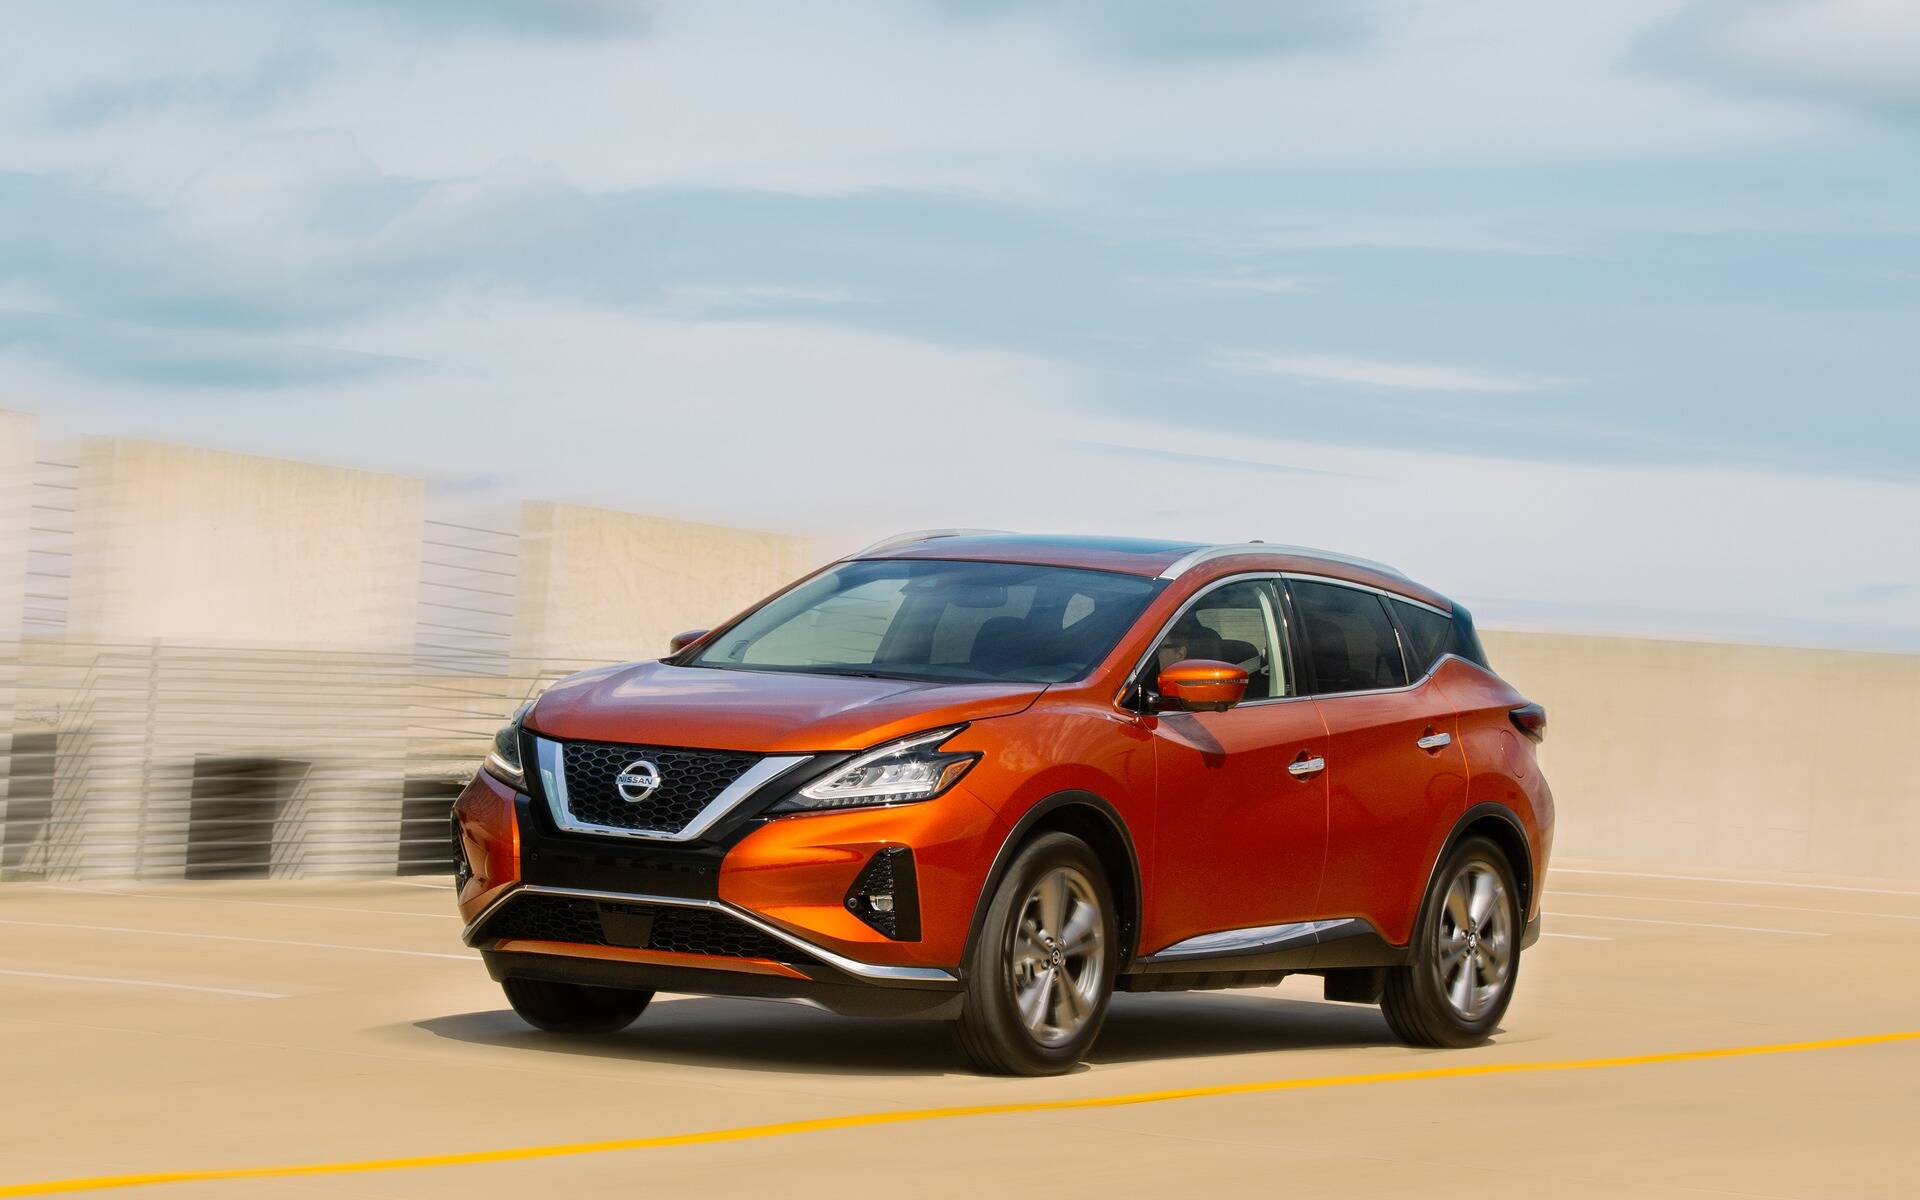 2021 Nissan Murano News Reviews Picture Galleries And Videos The Car Guide